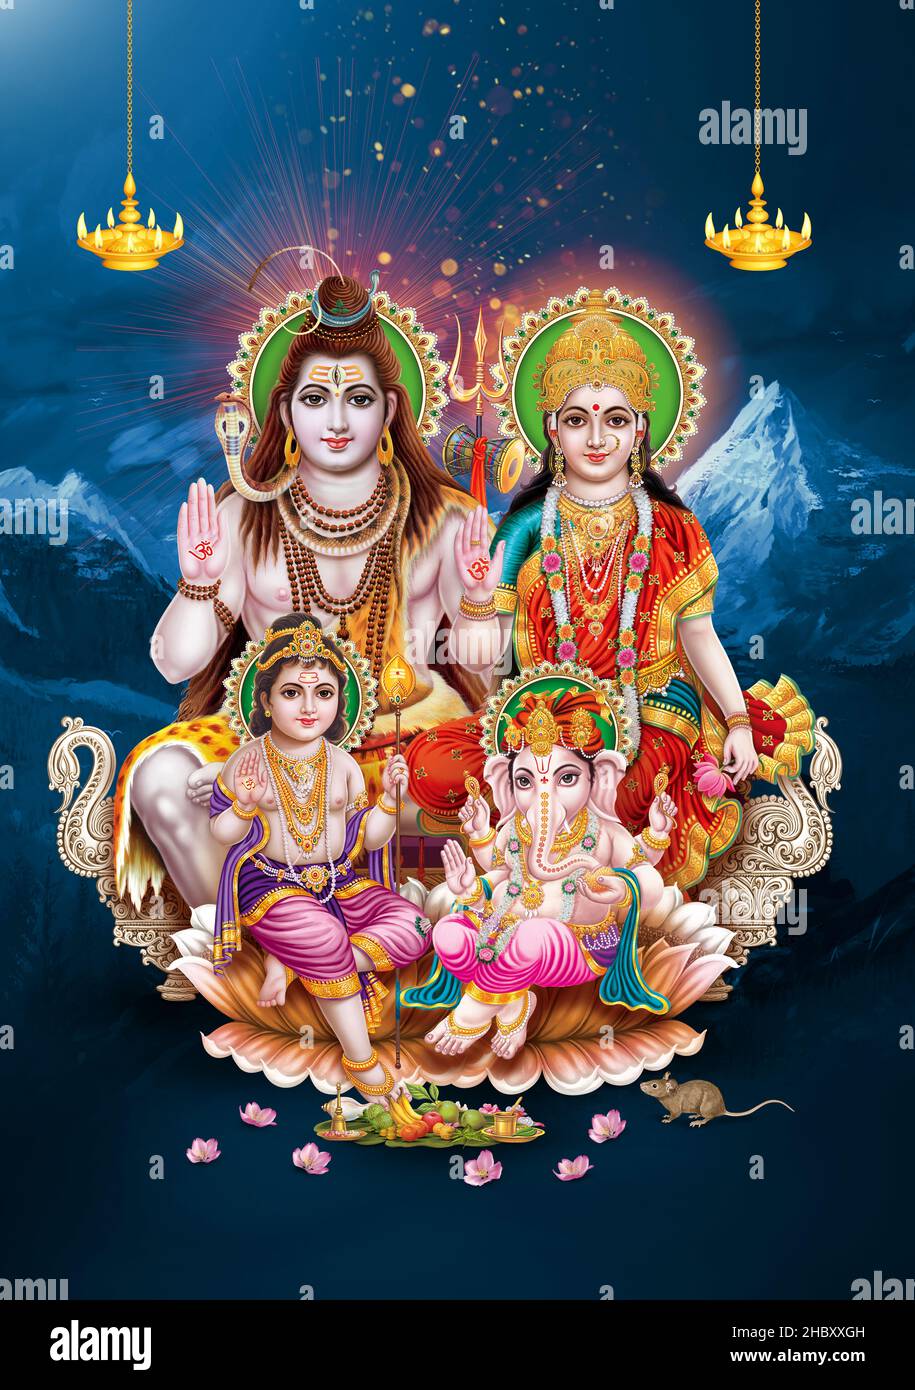 Incredible Assortment of Lord Shiva Family Images in Full 4K+ HD - Over ...